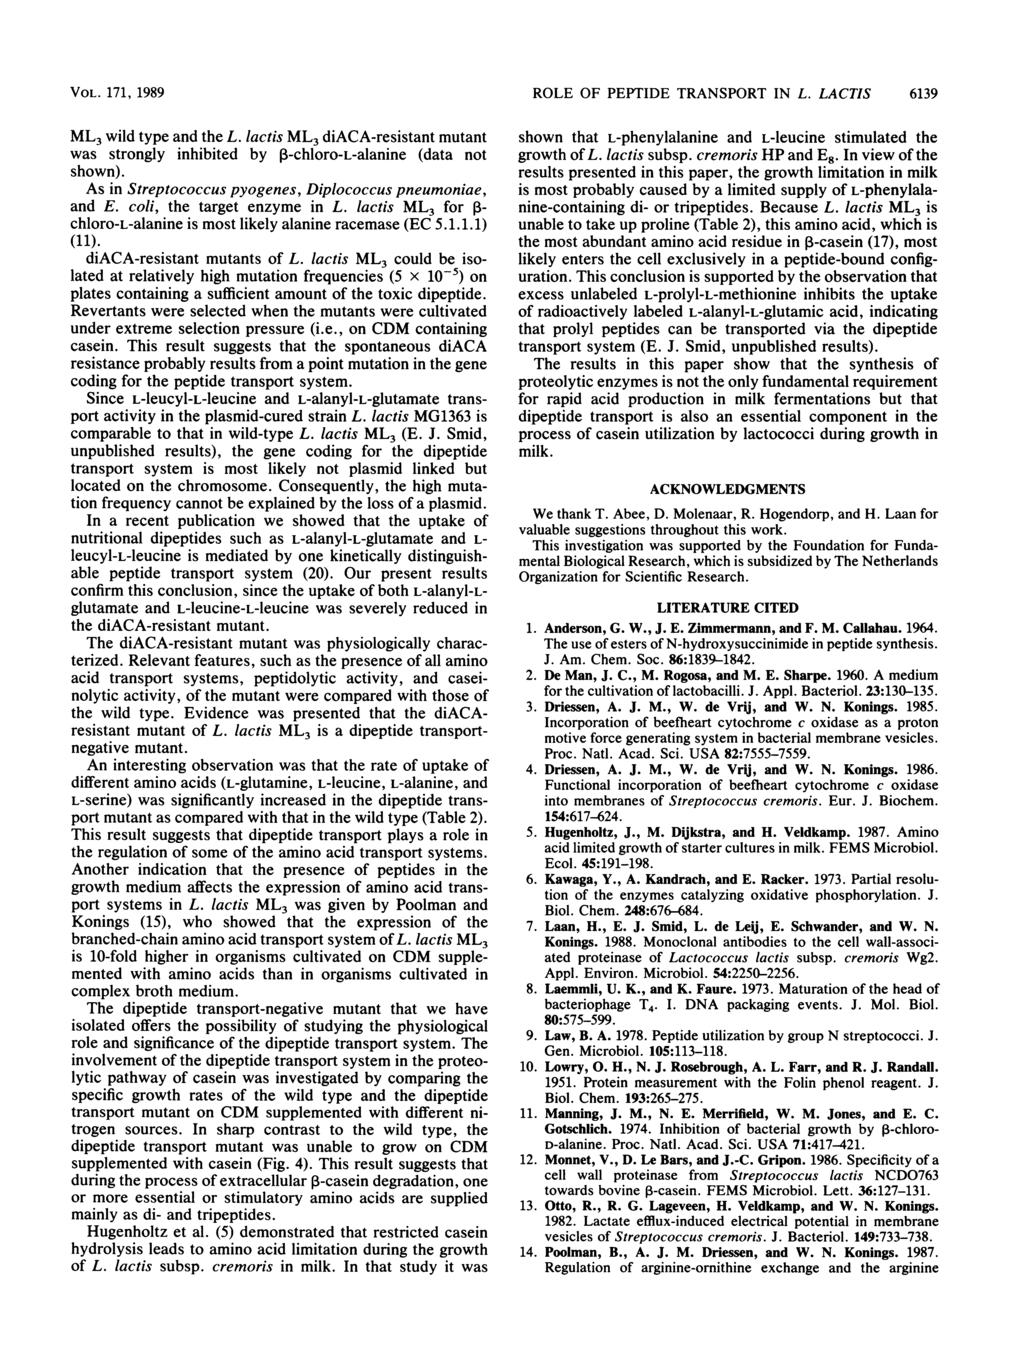 VOL. 171, 1989 ML3 wild type and the L. lactis ML3 diaca-resistant mutant was strongly inhibited by P-chloro-L-alanine (data not shown). As in Streptococcus pyogenes, Diplococcus pneumoniae, and.